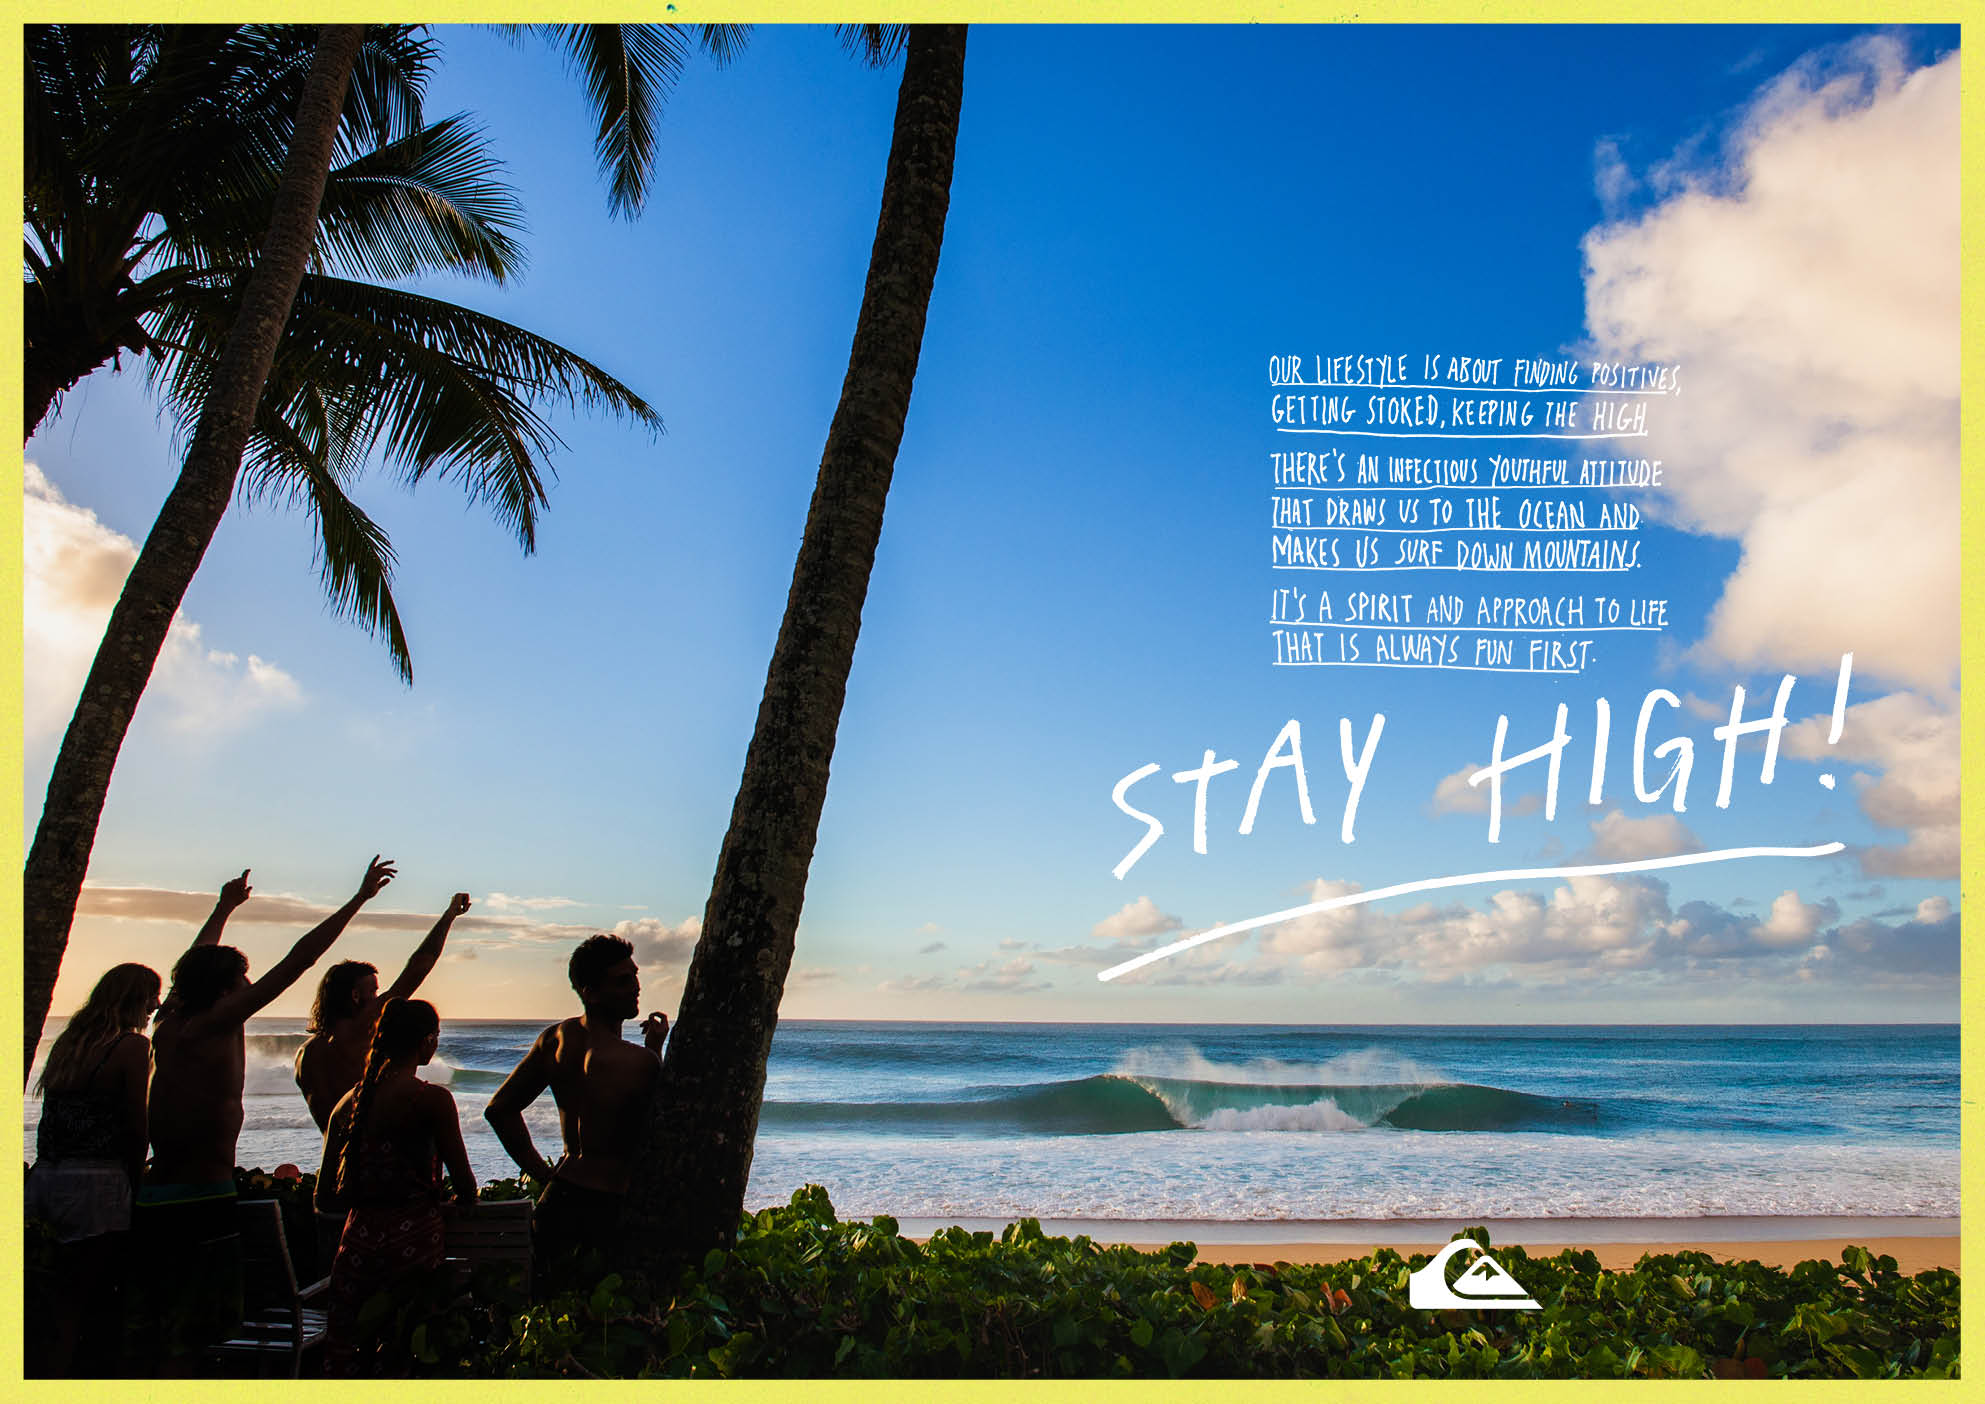 quiksilver marketing stay high